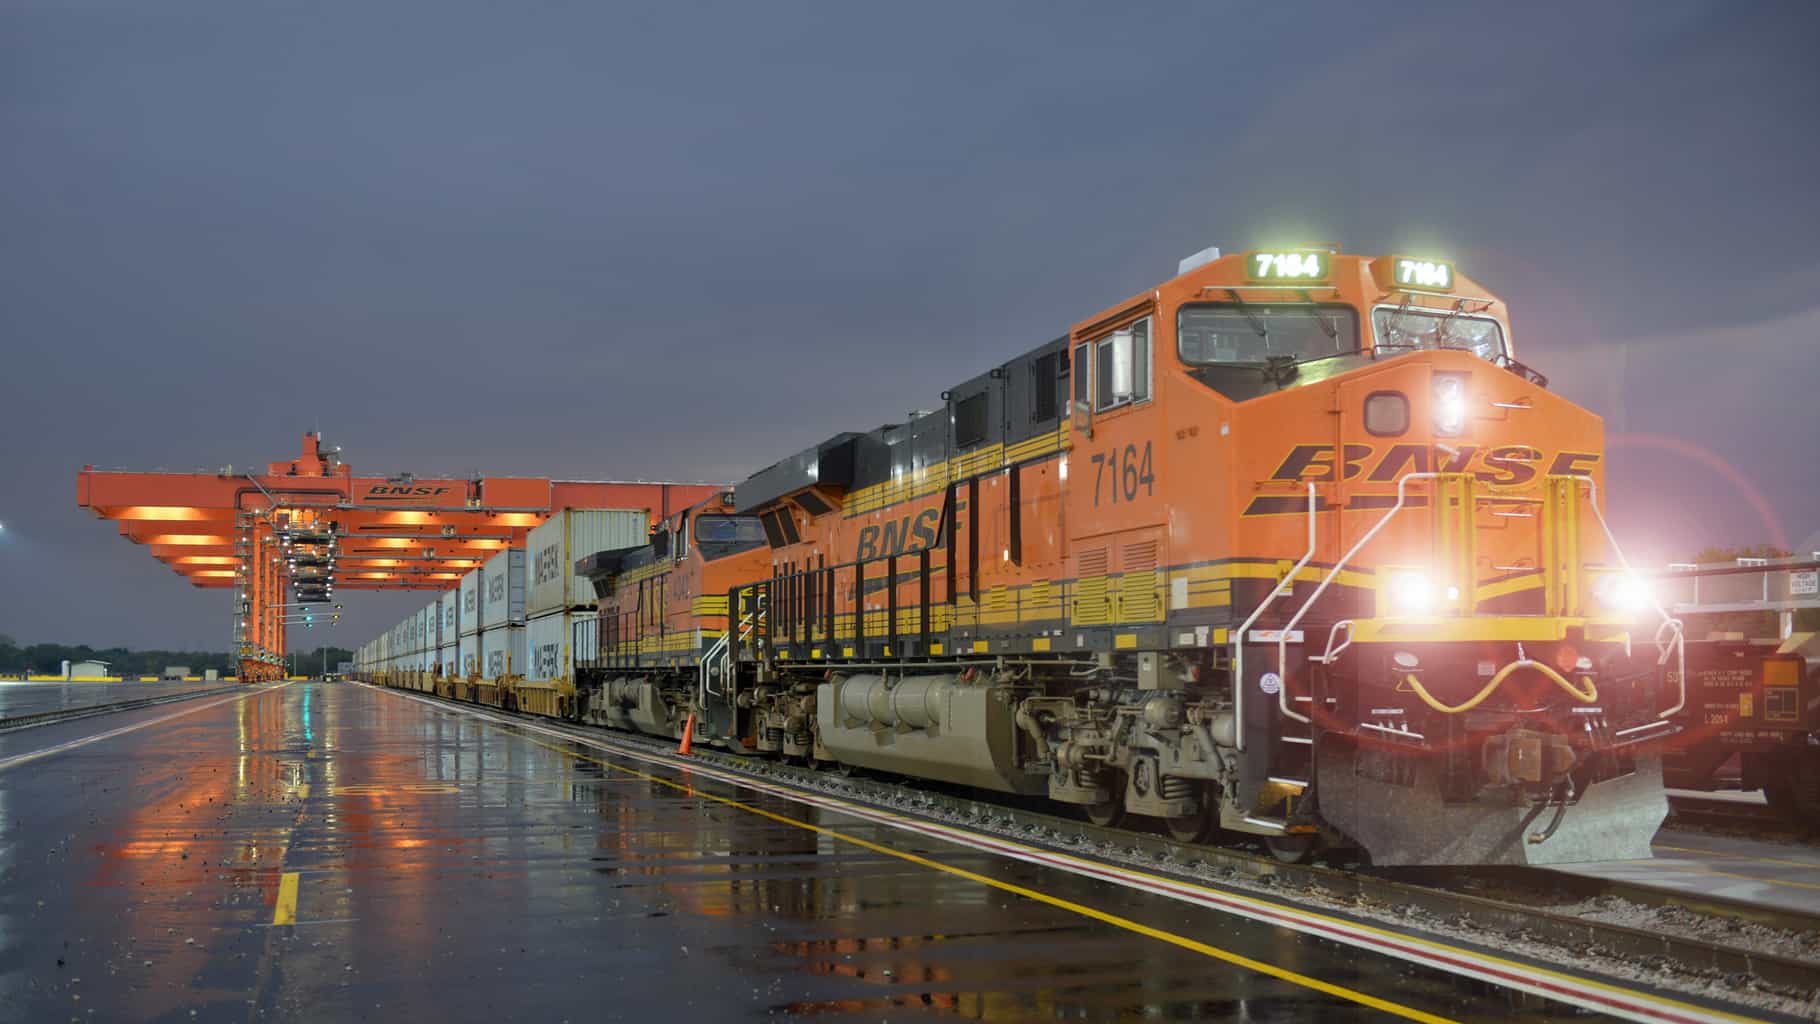 U.S. and European freight railroads are on different tracks FreightWaves